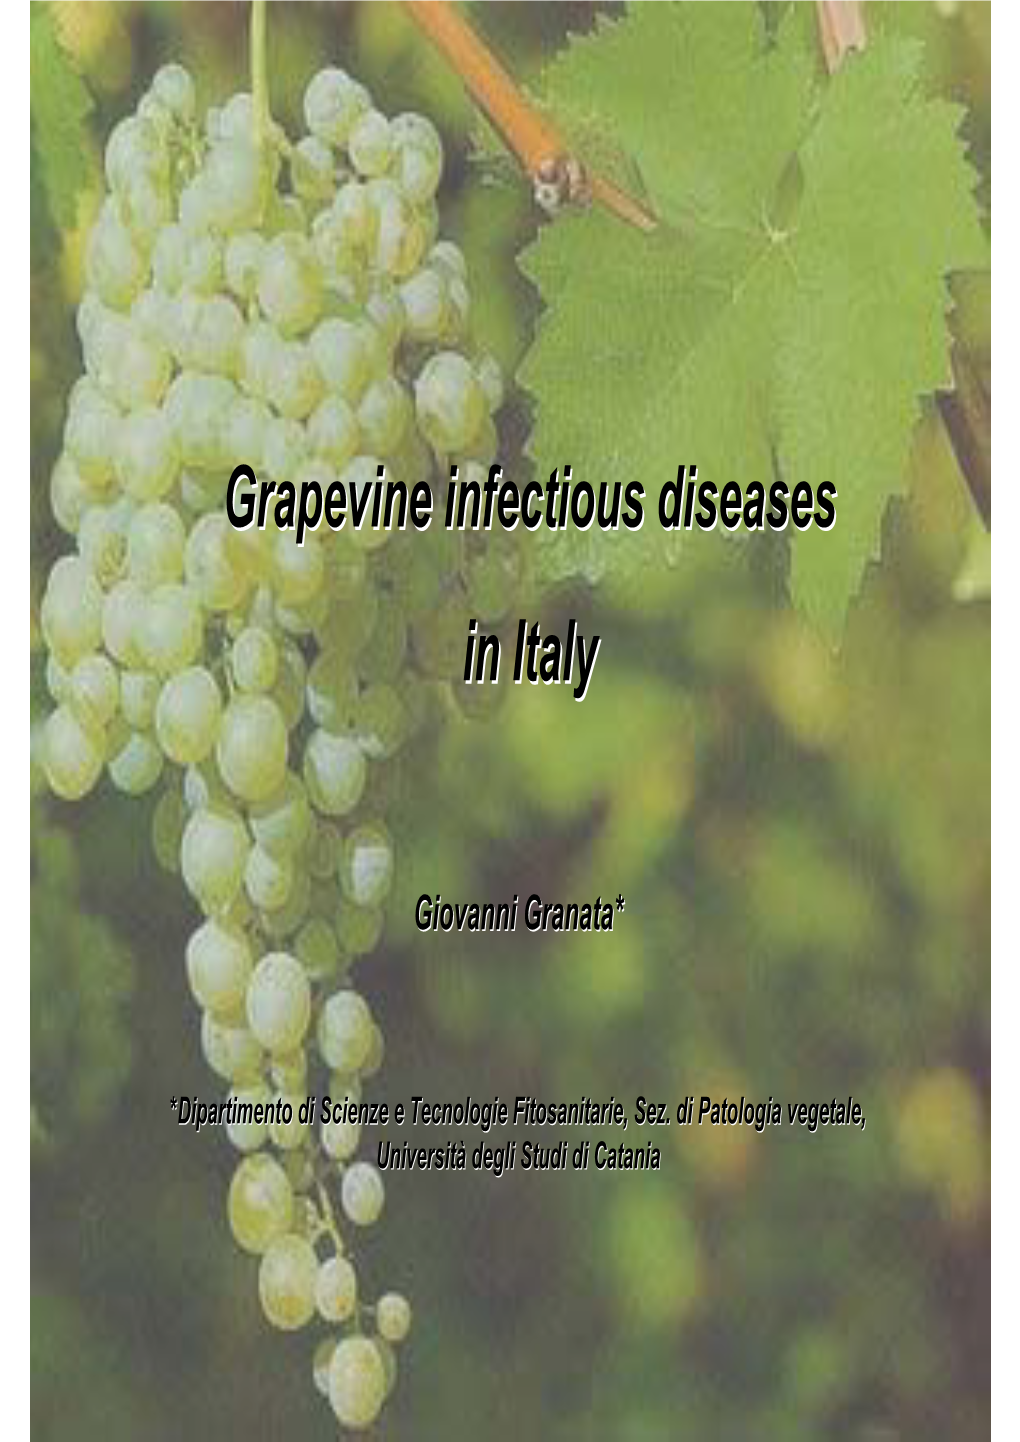 Grapevine Infectious Diseases in Italy